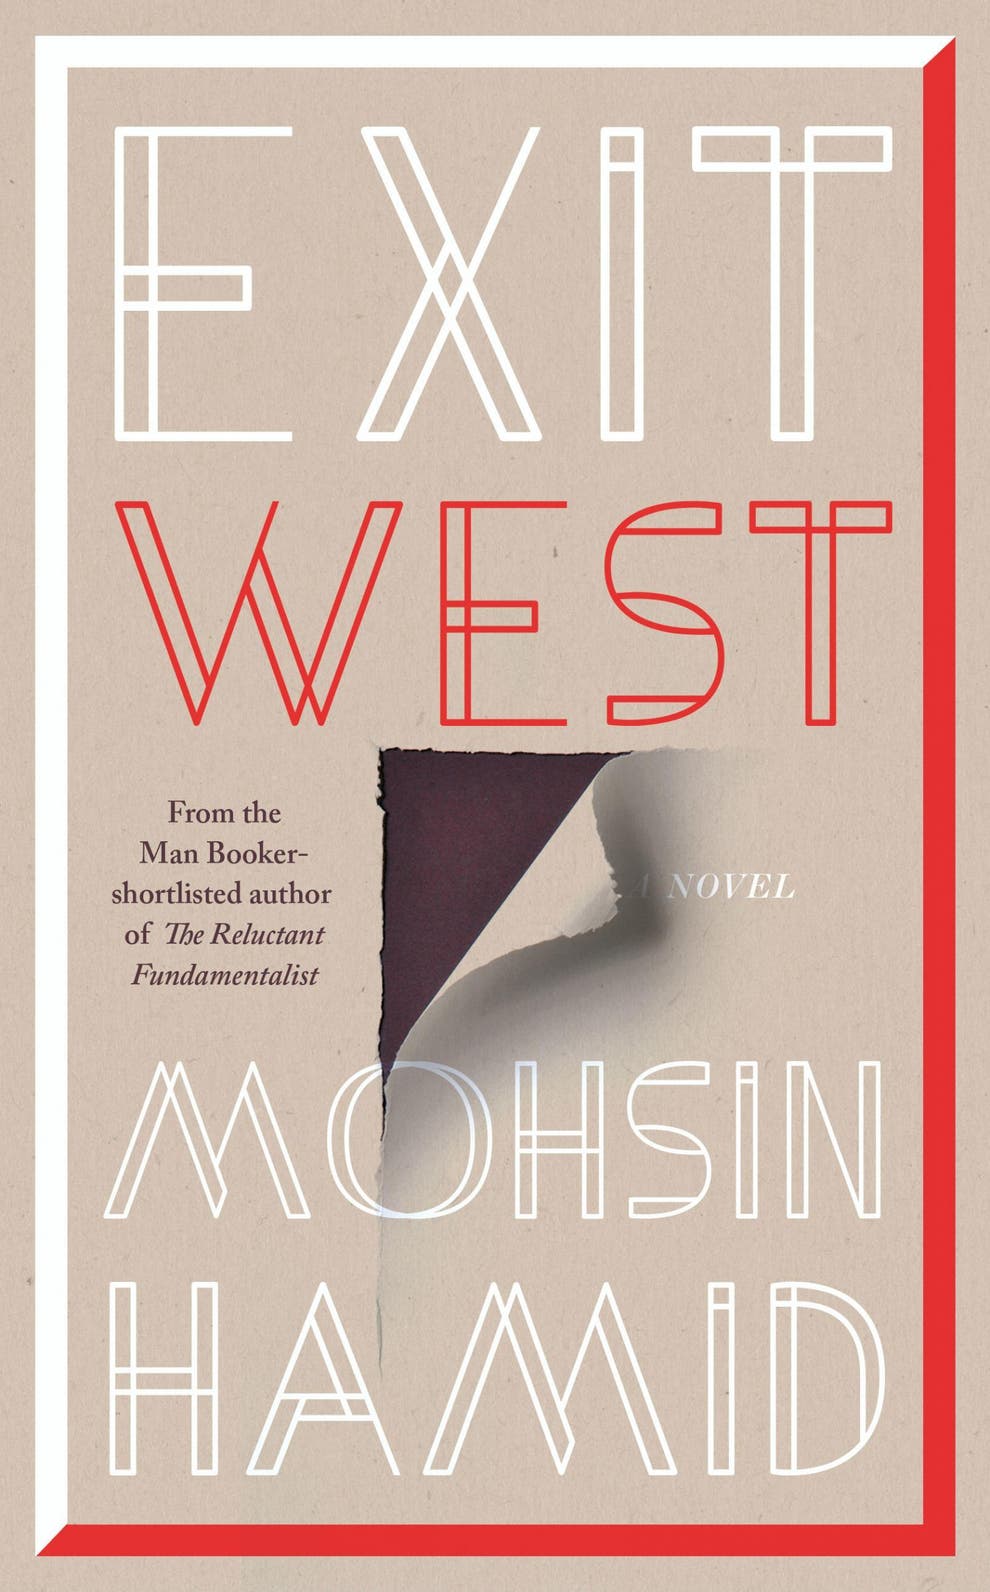 nytimes book review exit west